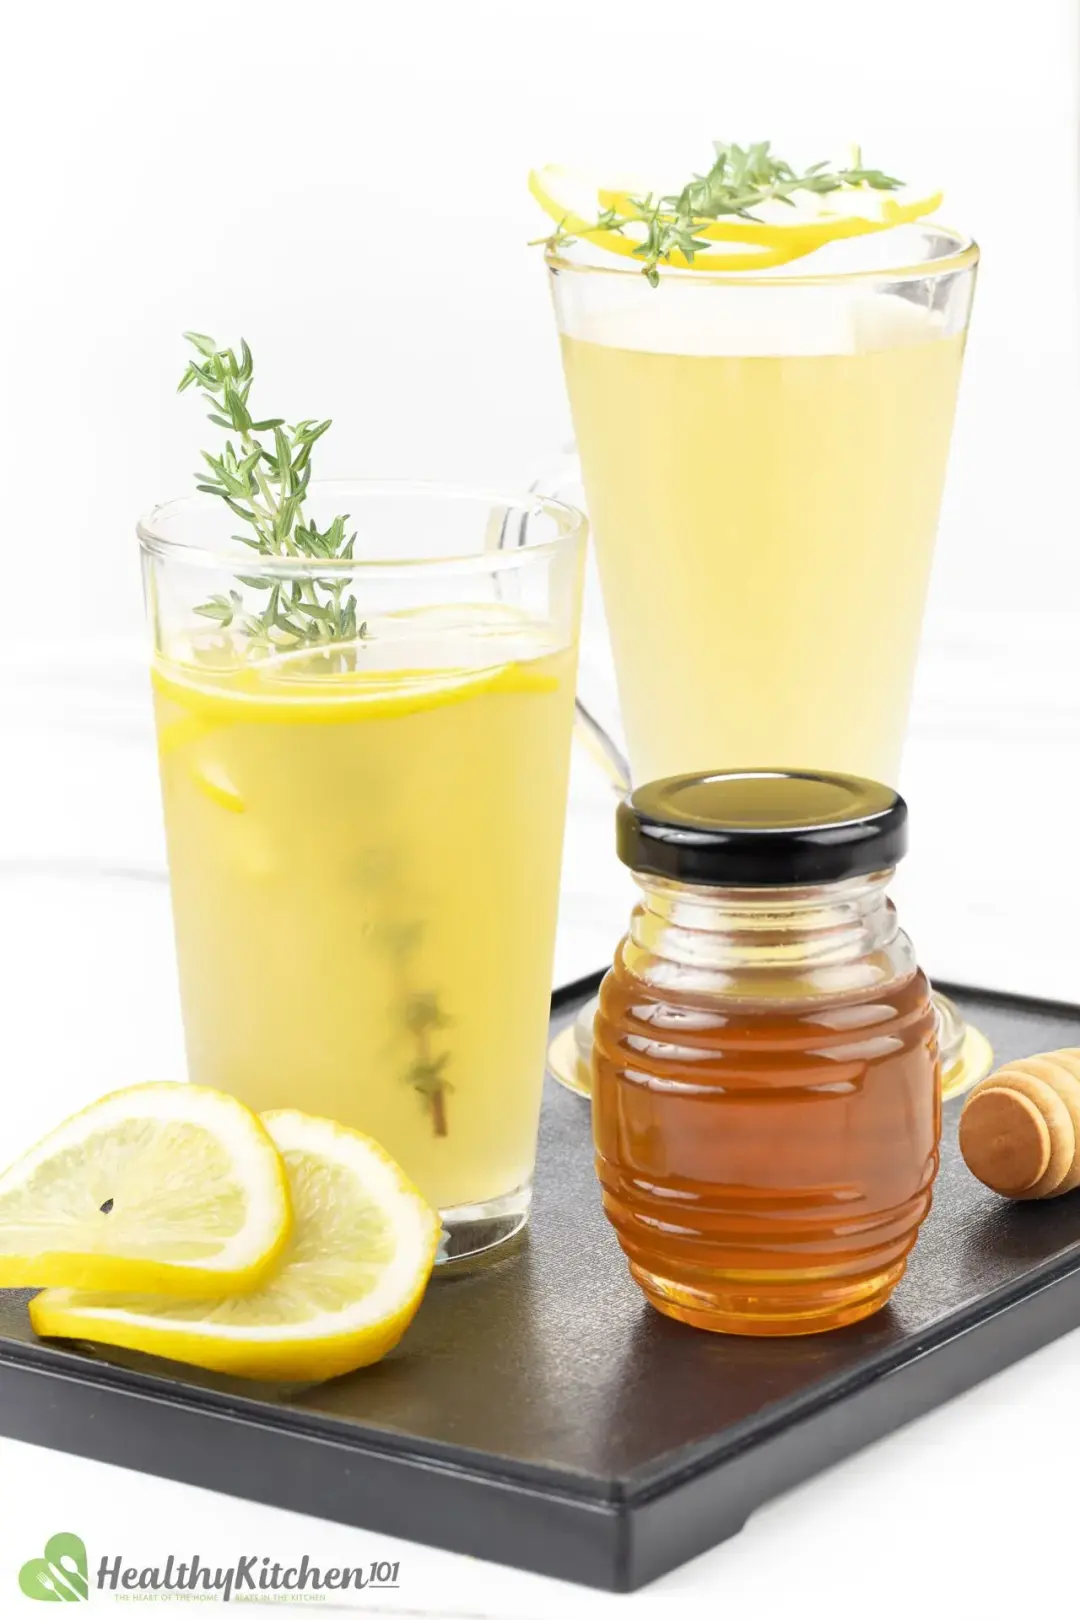 Two glasses of lemonade with thyme sprigs next to lemon wheels and a honey jar